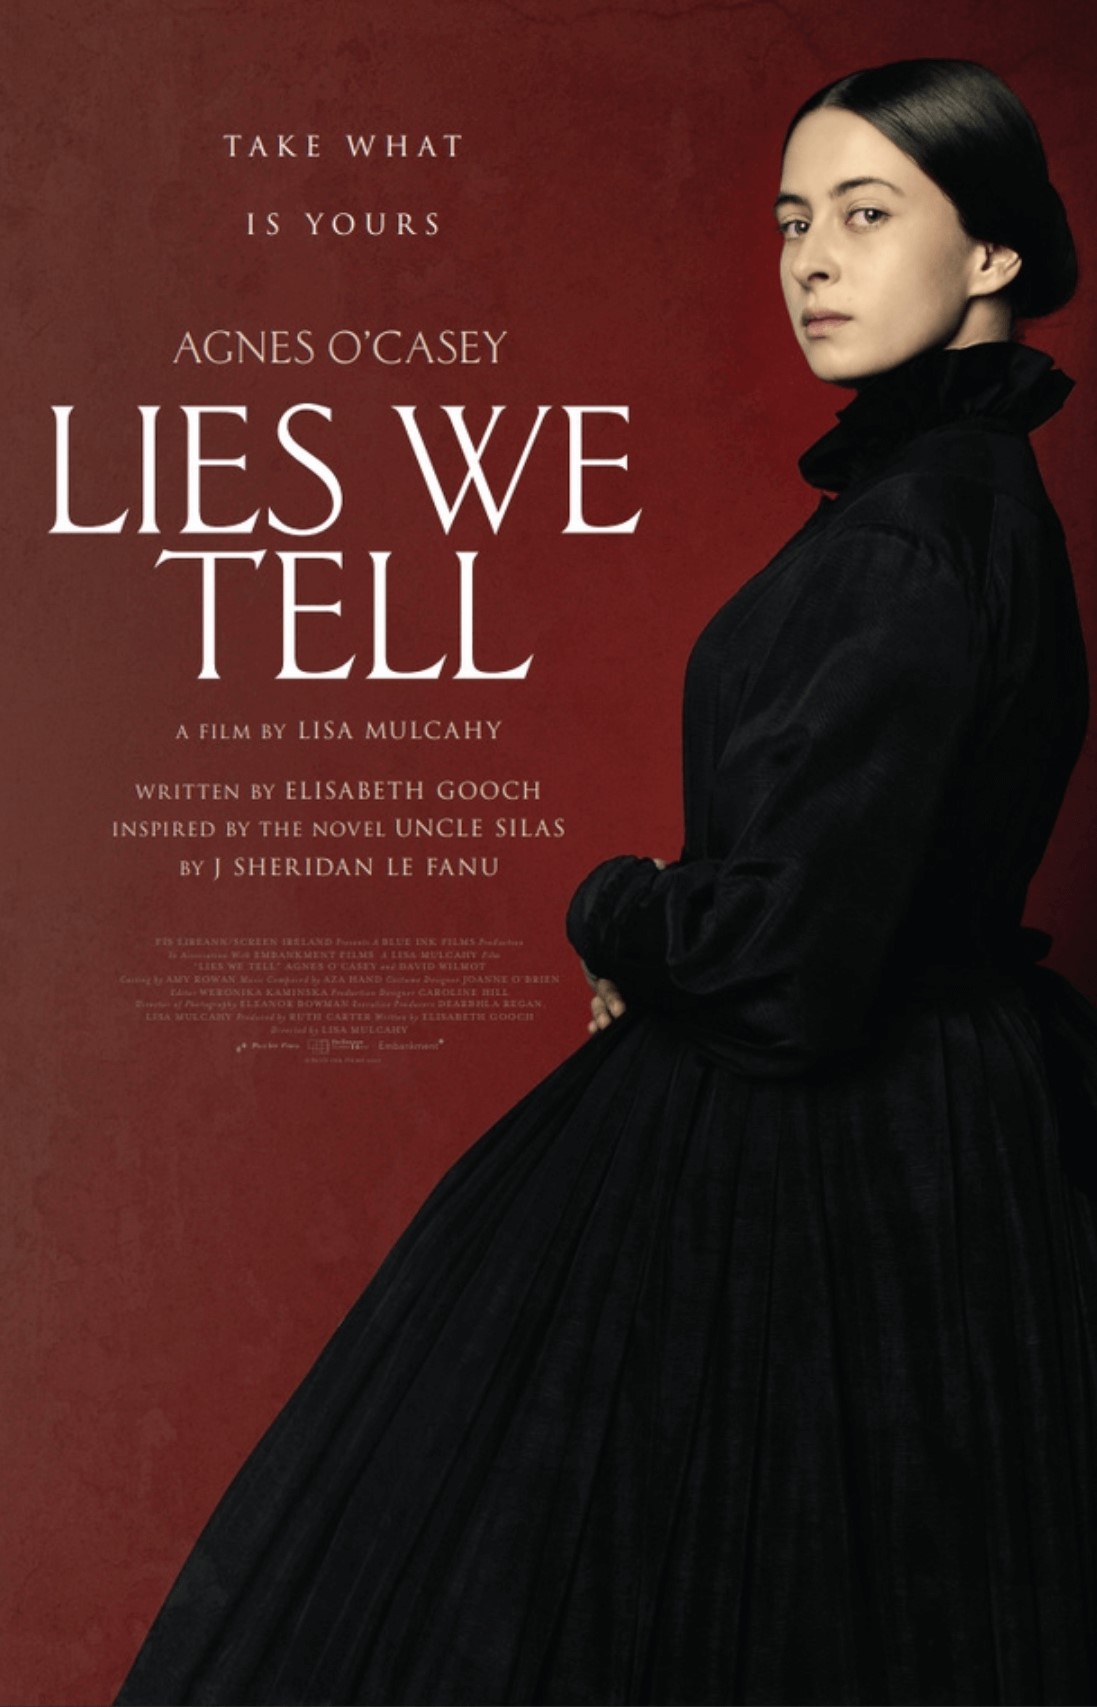 Lies We Tell - movie poster